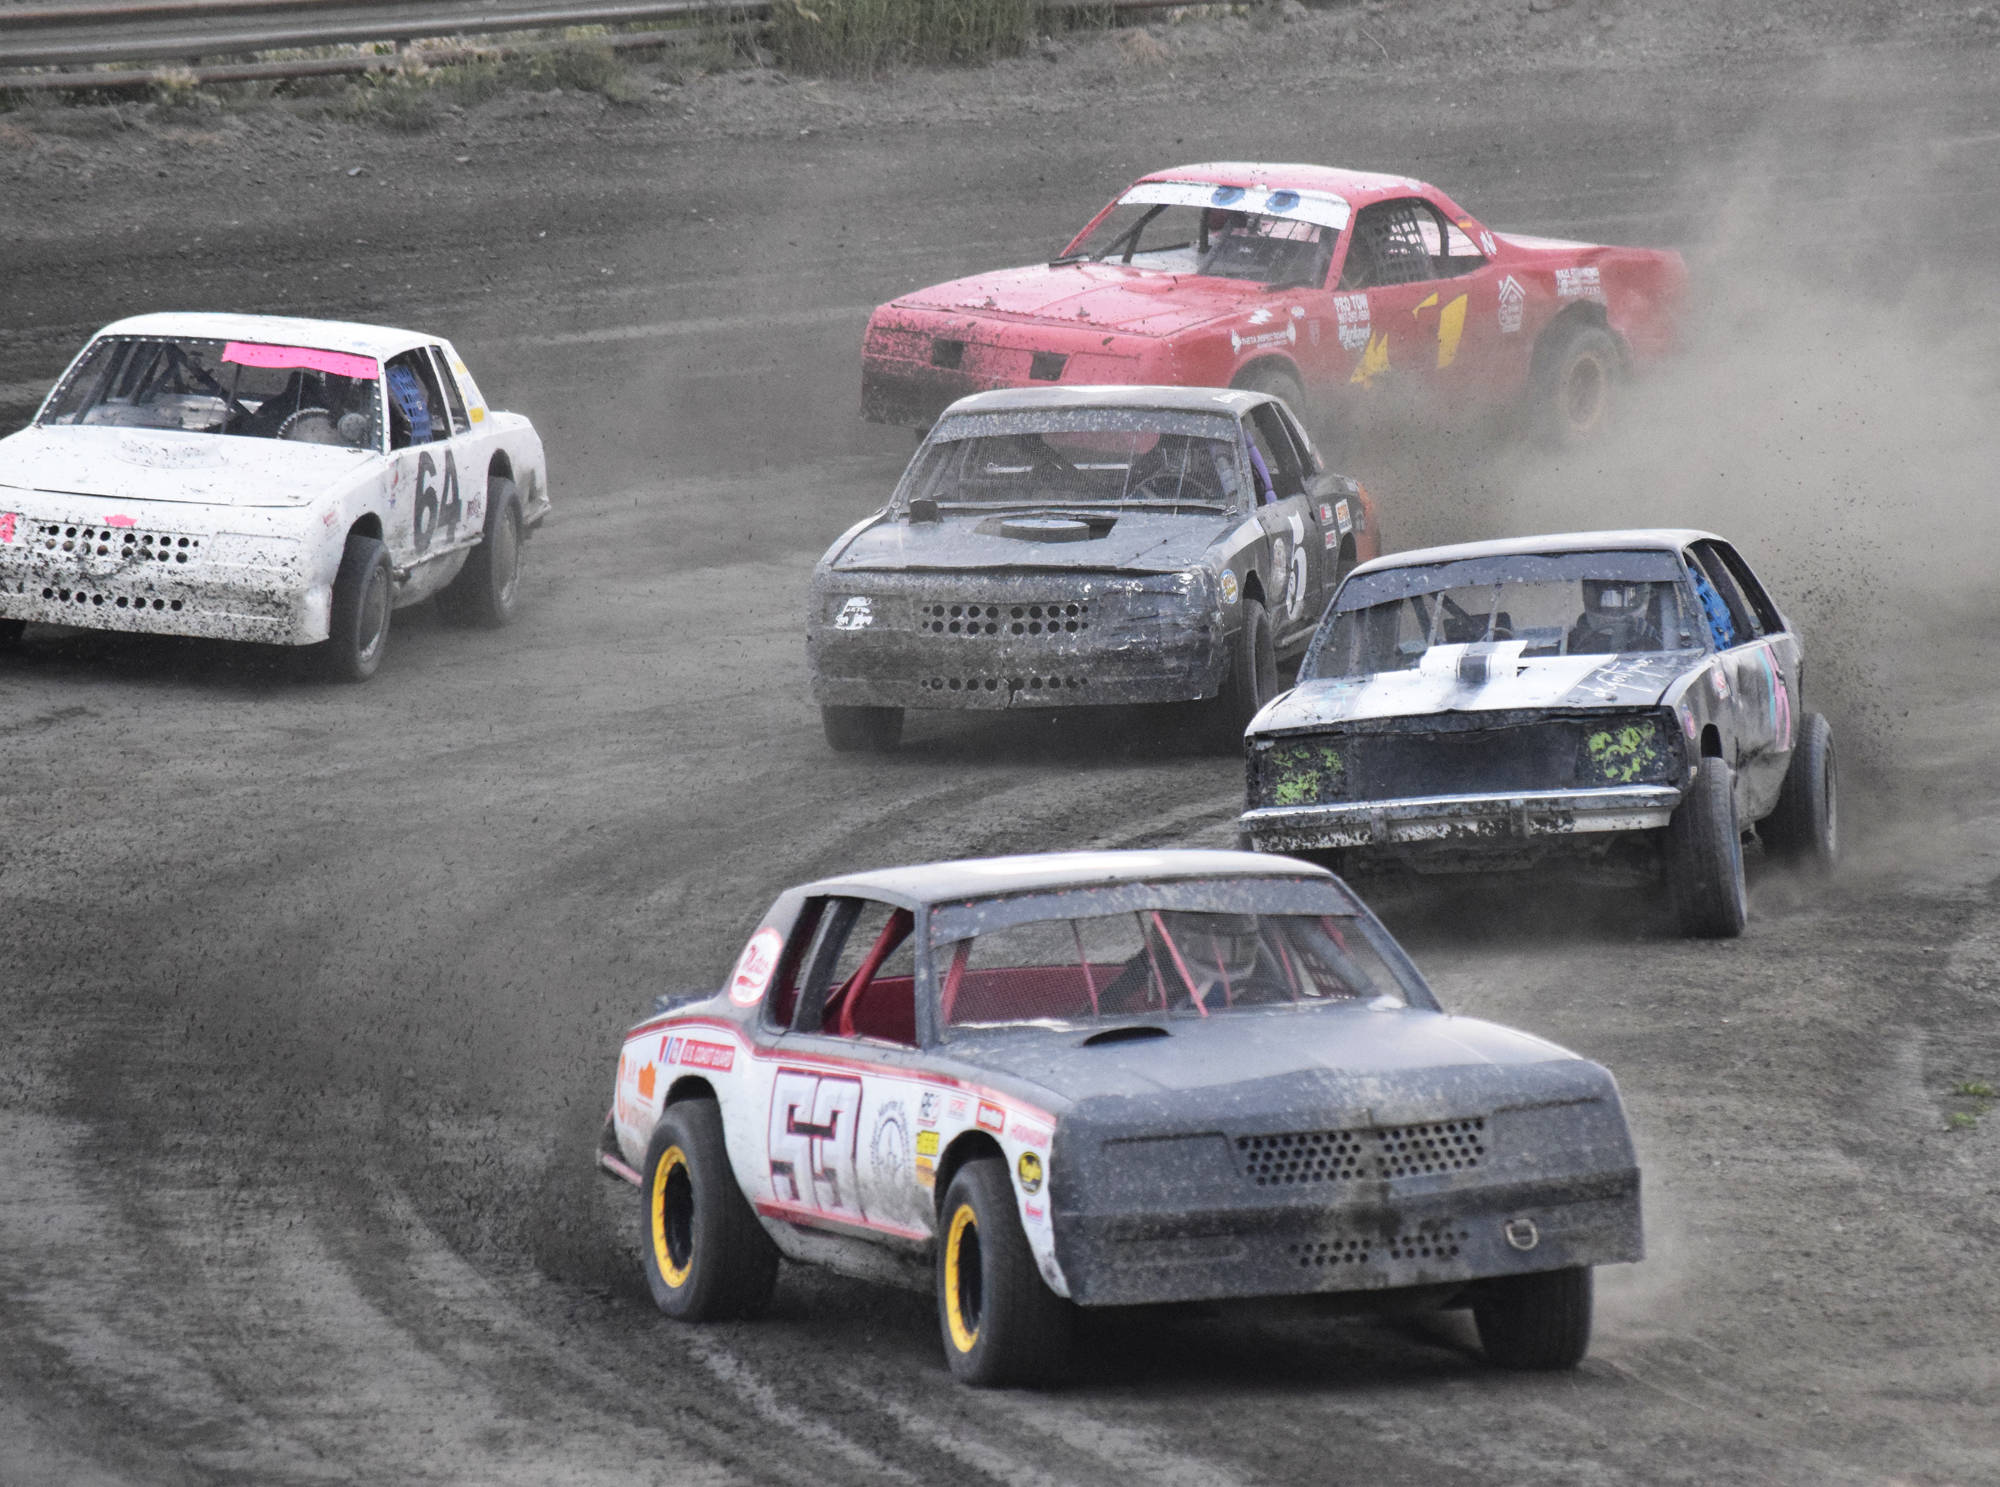 Clay Petersen leads a group of A-Stock racers around a curve Saturday, July 13, 2019, at Twin City Raceway in Kenai, Alaska. The group includes Christy Bass (left), Bridgette Attleson (middle), Mady Stichal (top) and Gracie Bass (right). (Photo by Joey Klecka/Peninsula Clarion)